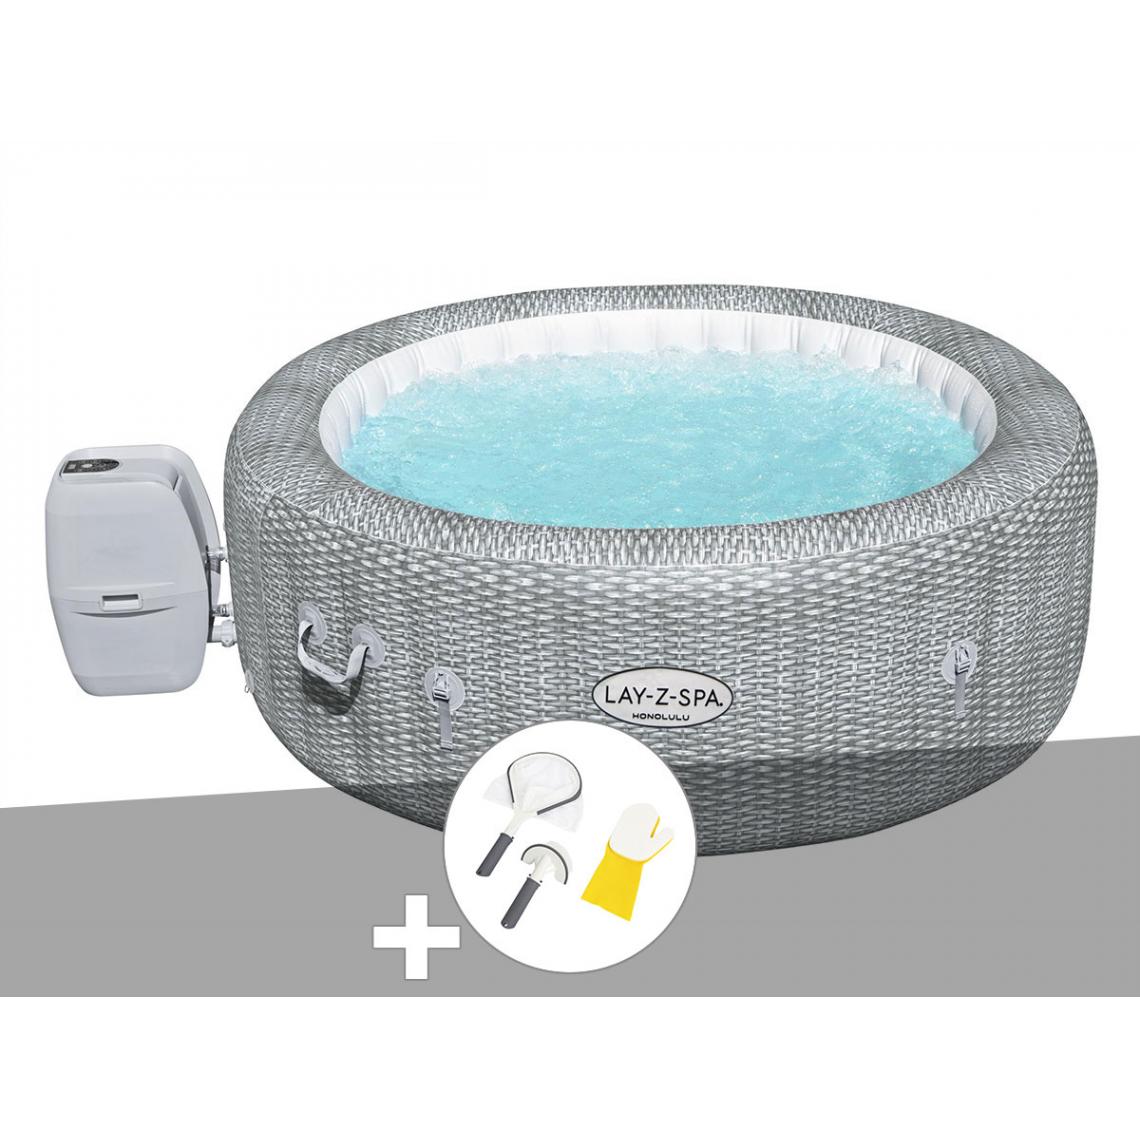 Bestway - Kit spa gonflable Bestway Lay-Z-Spa Honolulu rond Airjet 4/6 places + Kit de nettoyage - Spa gonflable